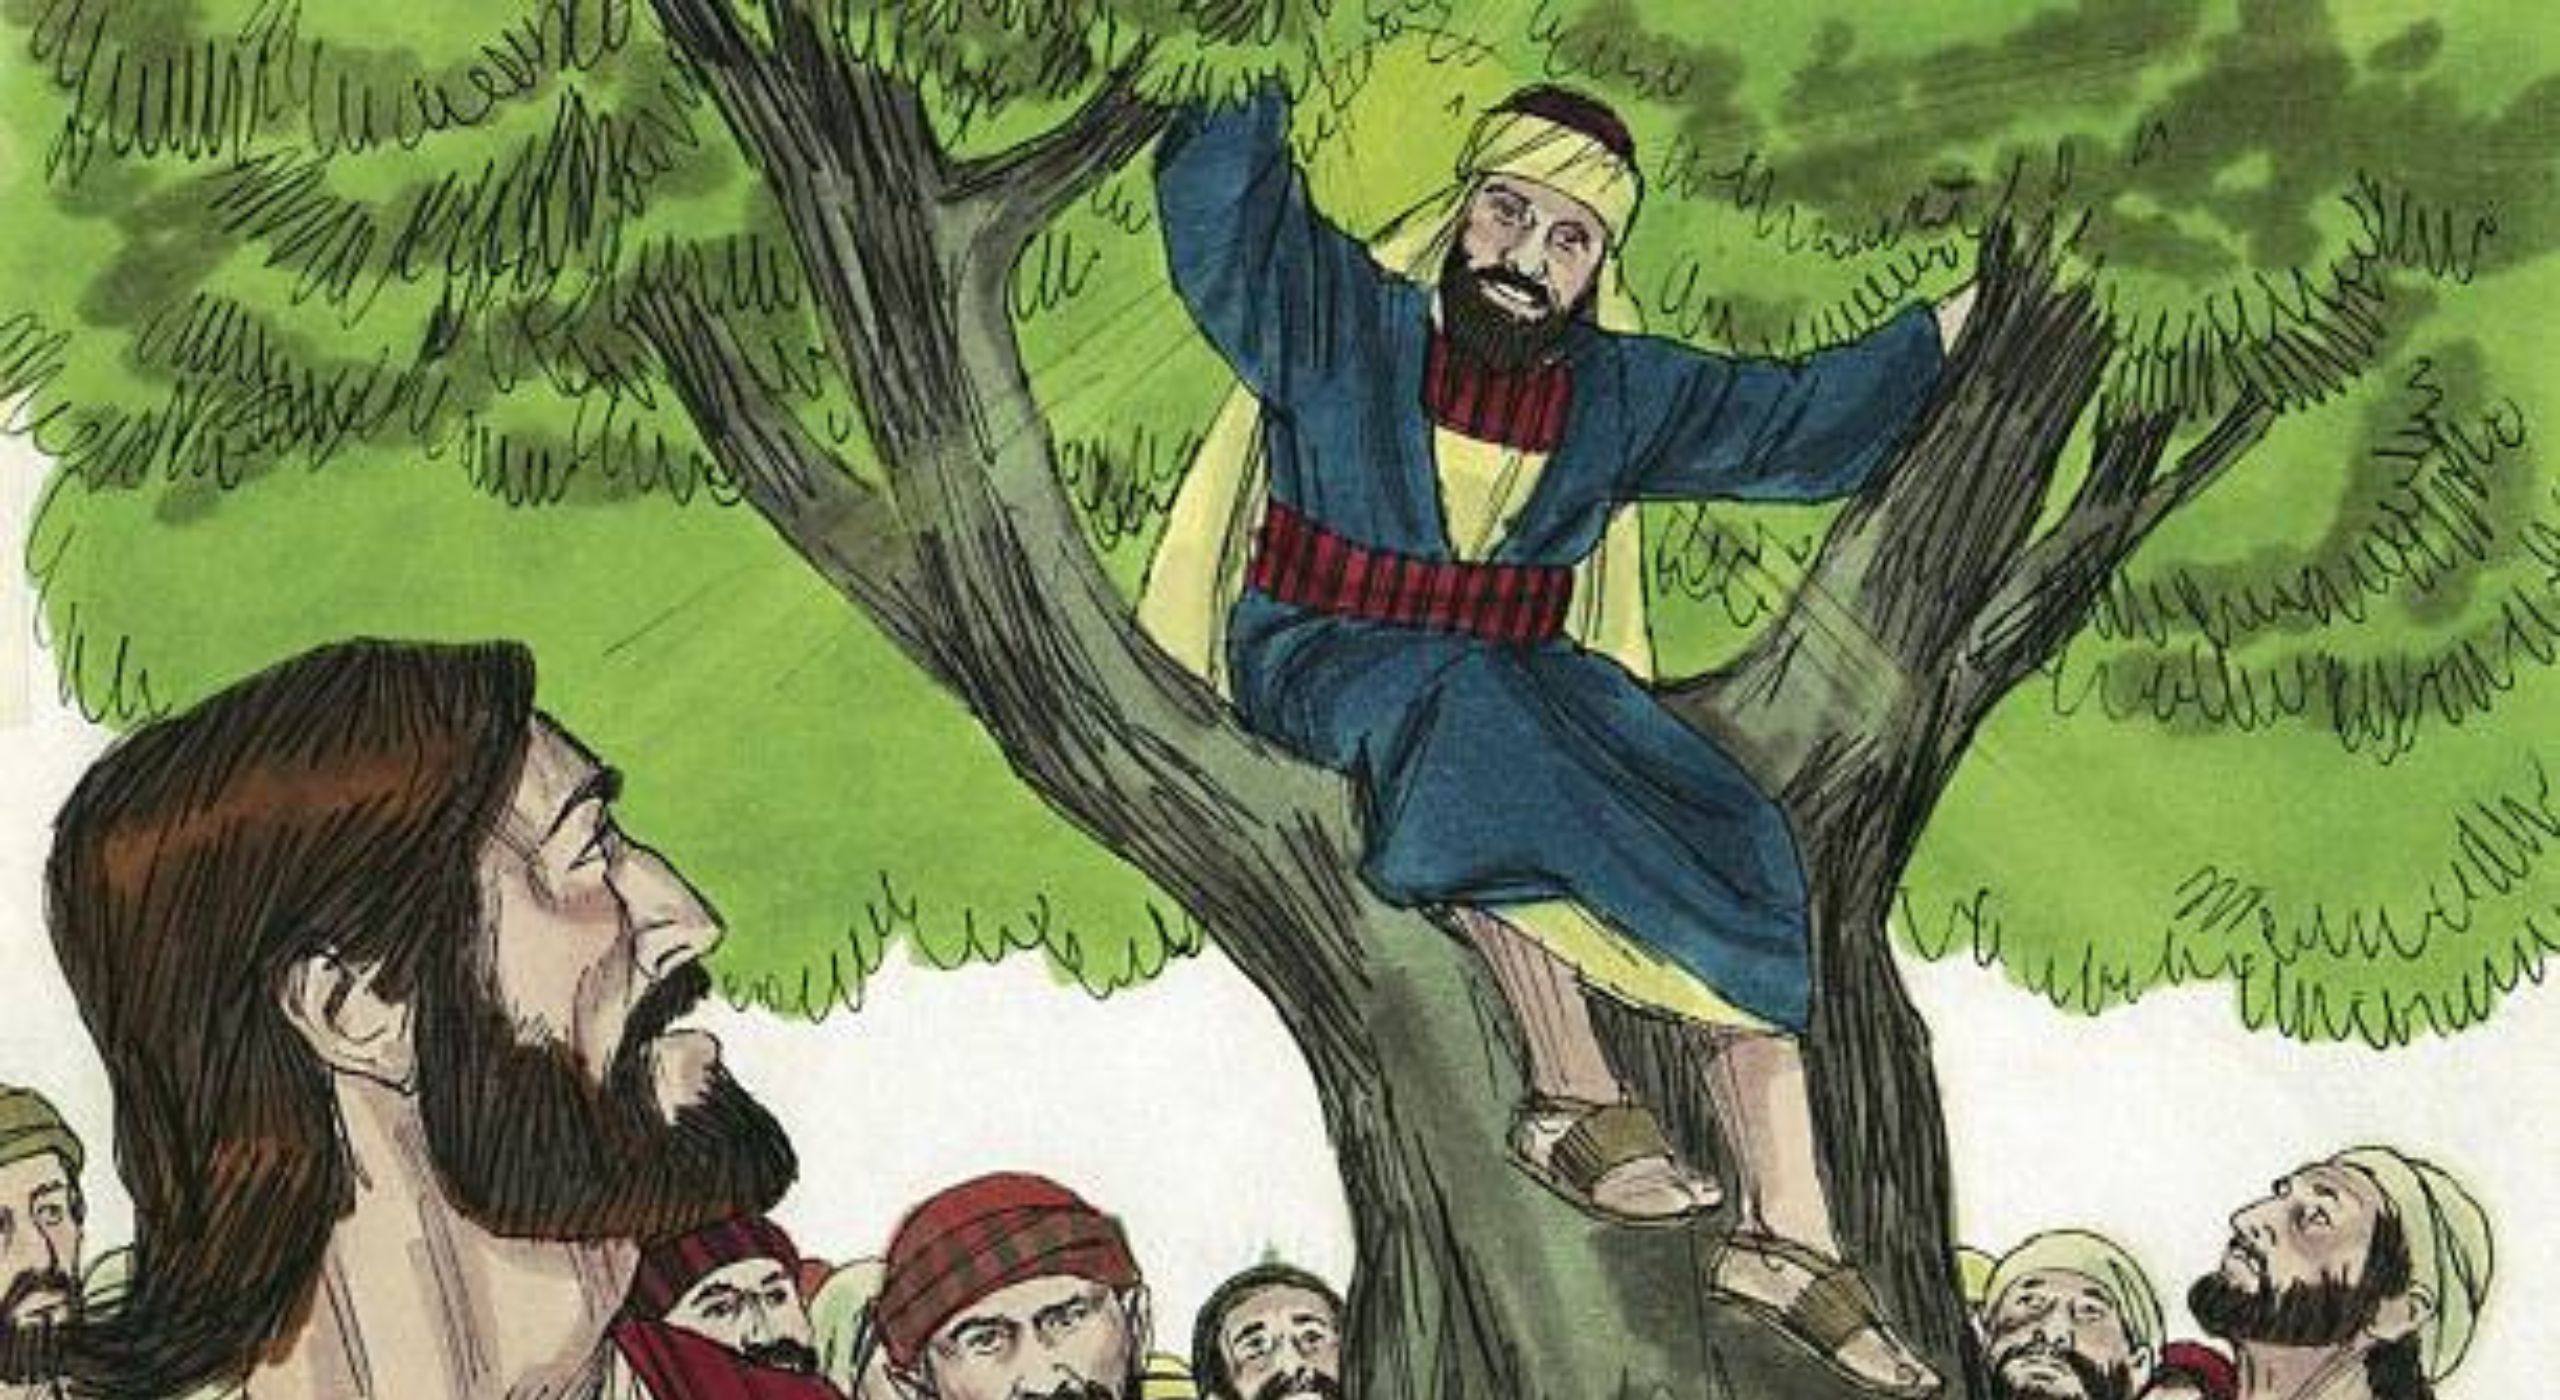 WHAT WERE YOU LOOKING FOR ZACCHAEUS ?